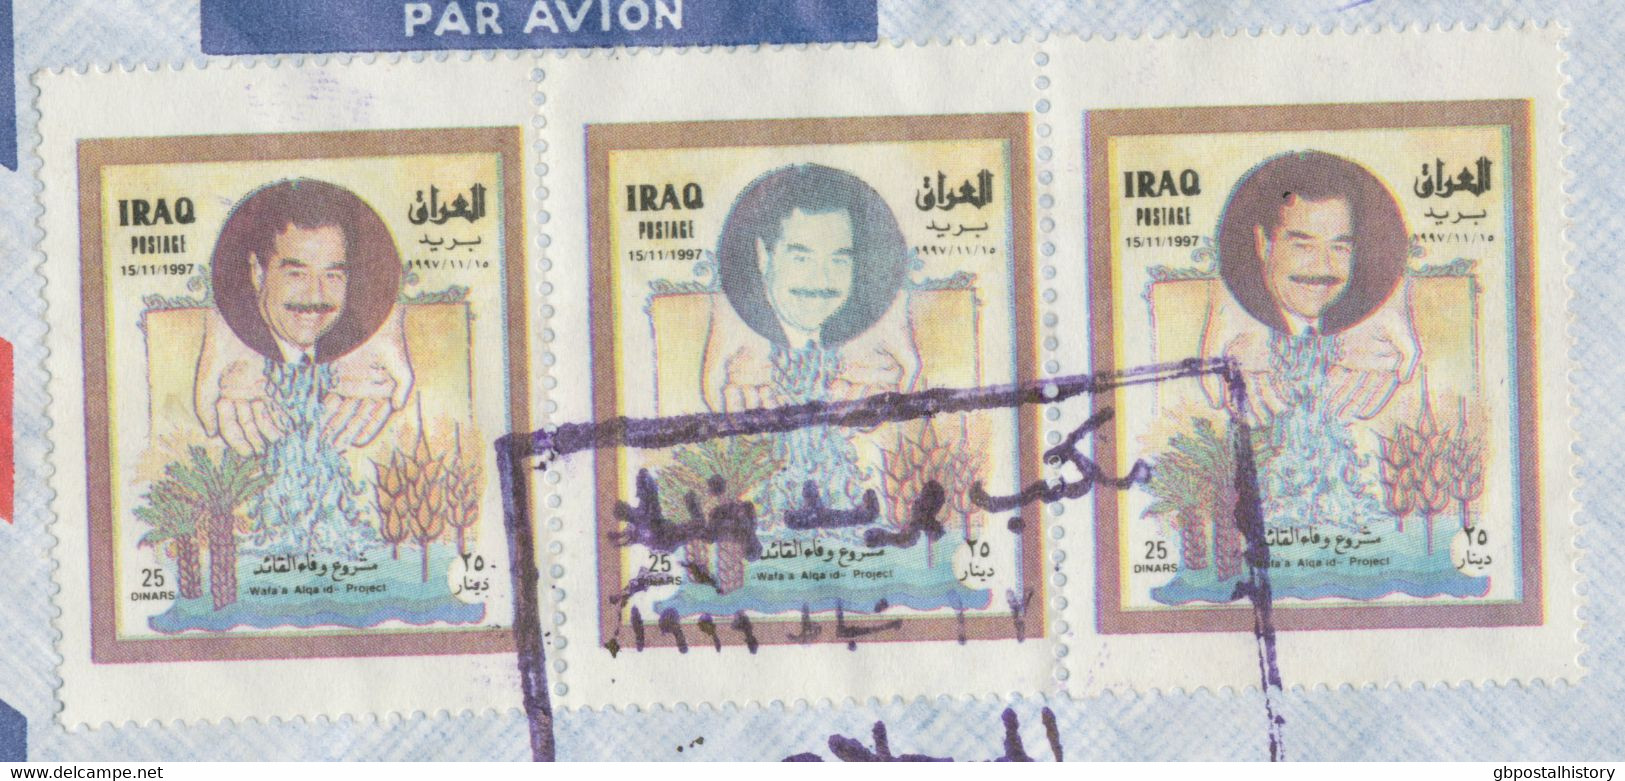 IRAQ 1997 Completion Of The Drinking Water Canal From The Euphrates To Basra. Saddam Hussein (1937-2006), VARIETIES - Iraq